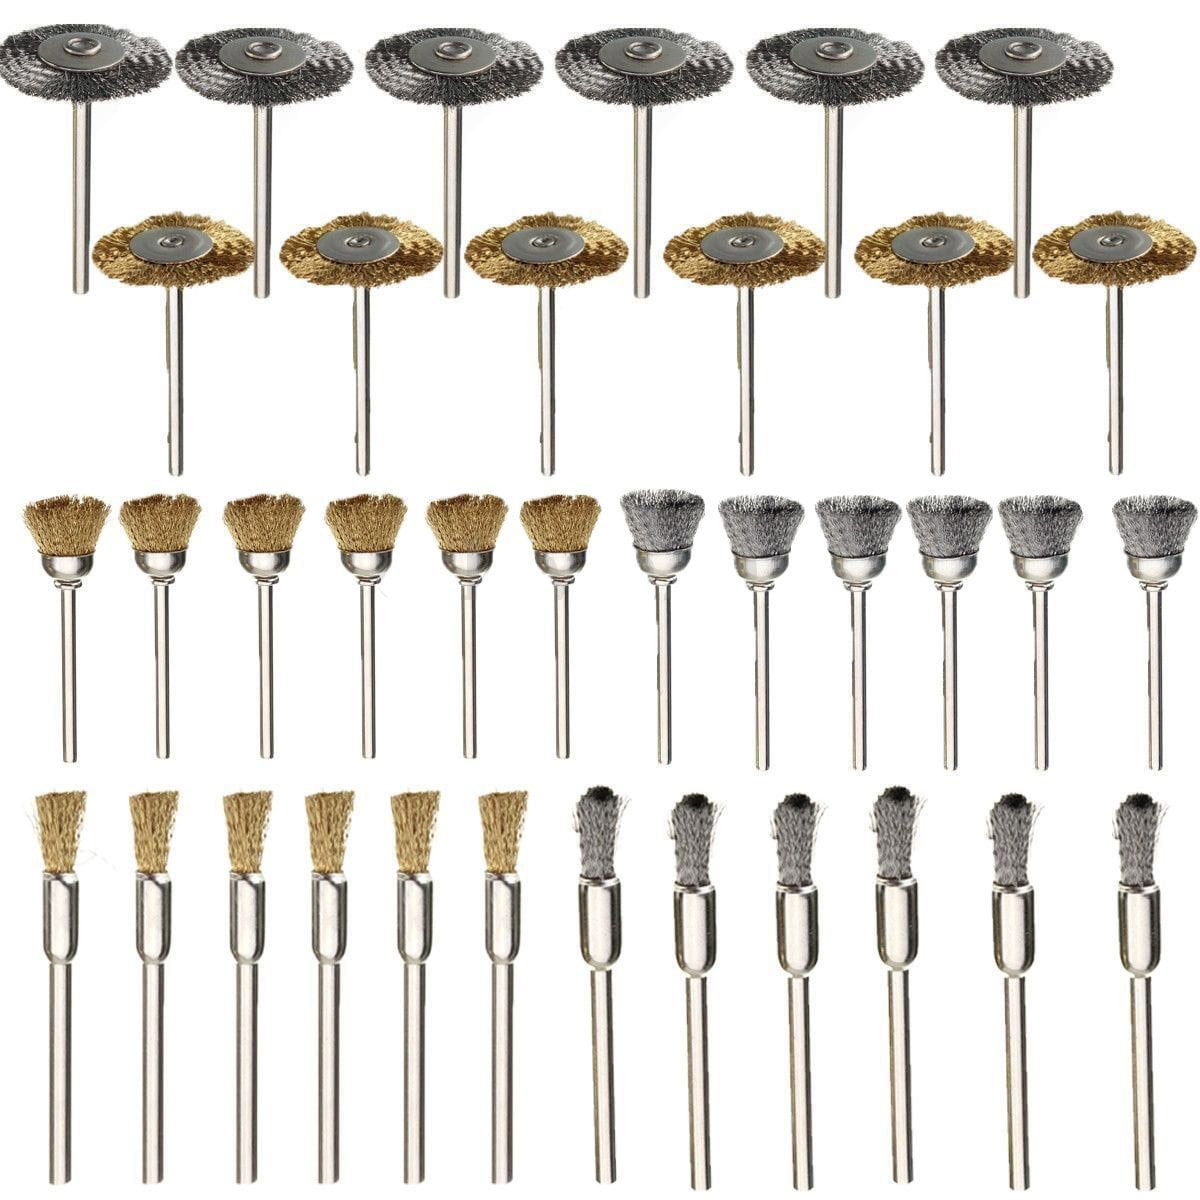 Steel Wire Brass Drill Brush Mini Dremel Drill Polishing Grinding Head  Plated Wheels Brushes Drill Rotary T-shaped Accessories